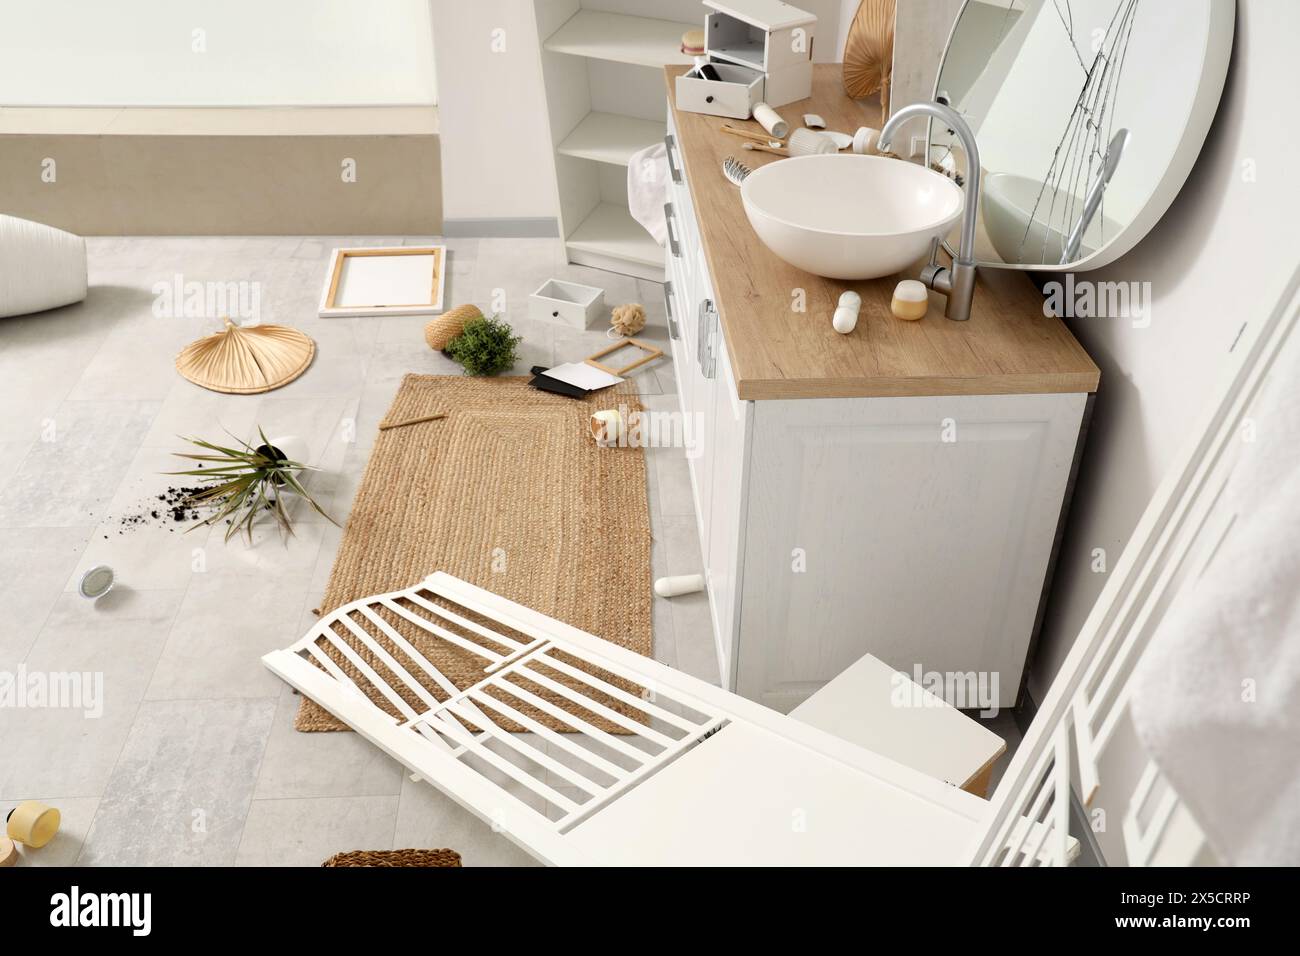 Counters with overturned things on floor in messy bathroom Stock Photo